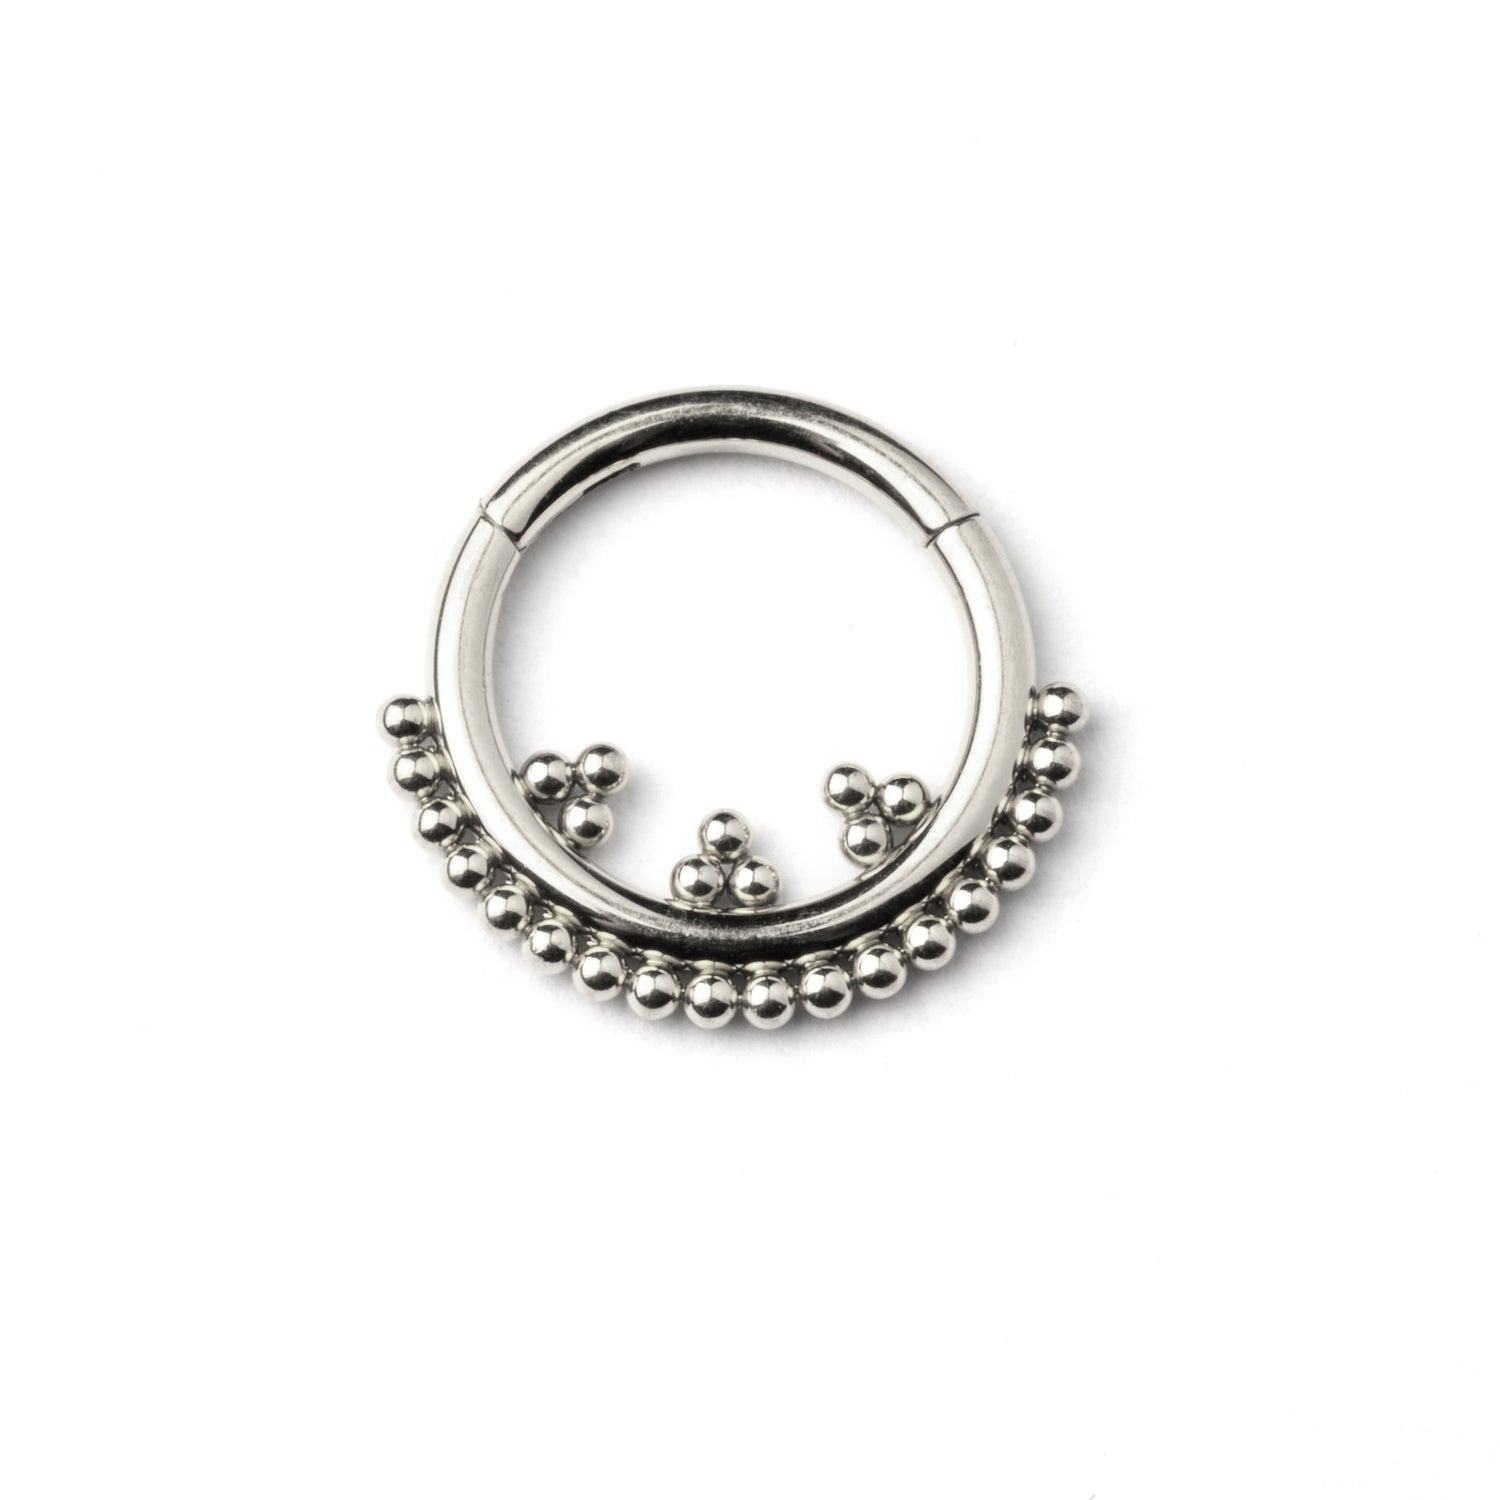 Orbit surgical steel septum clicker with dots ornaments frontal view